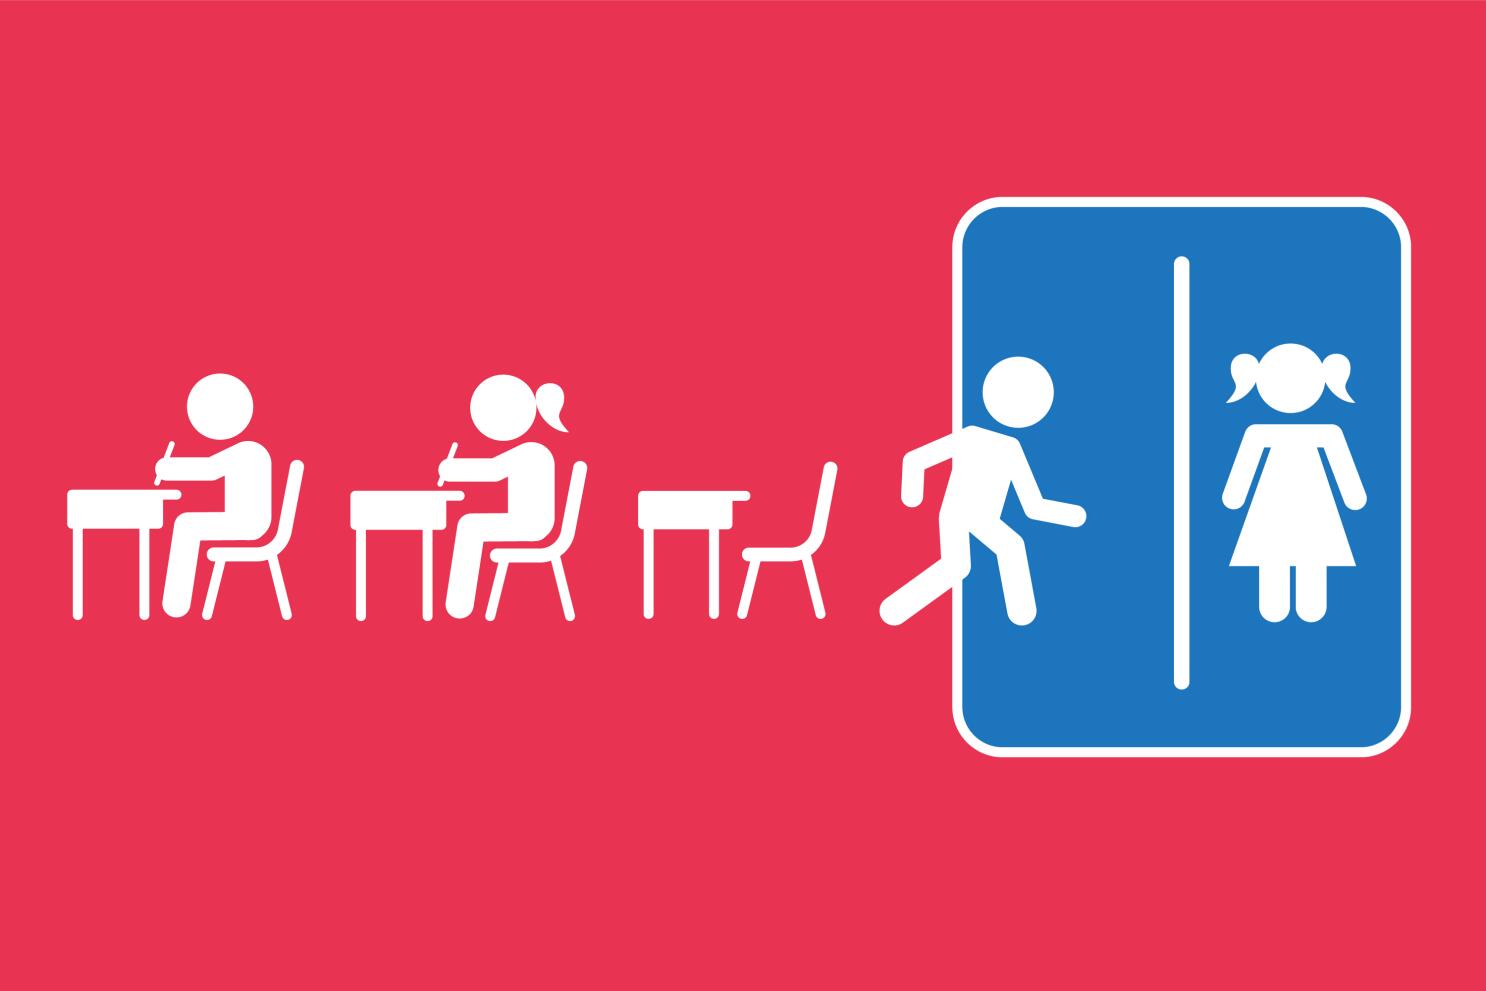 Potty training: Signs and more